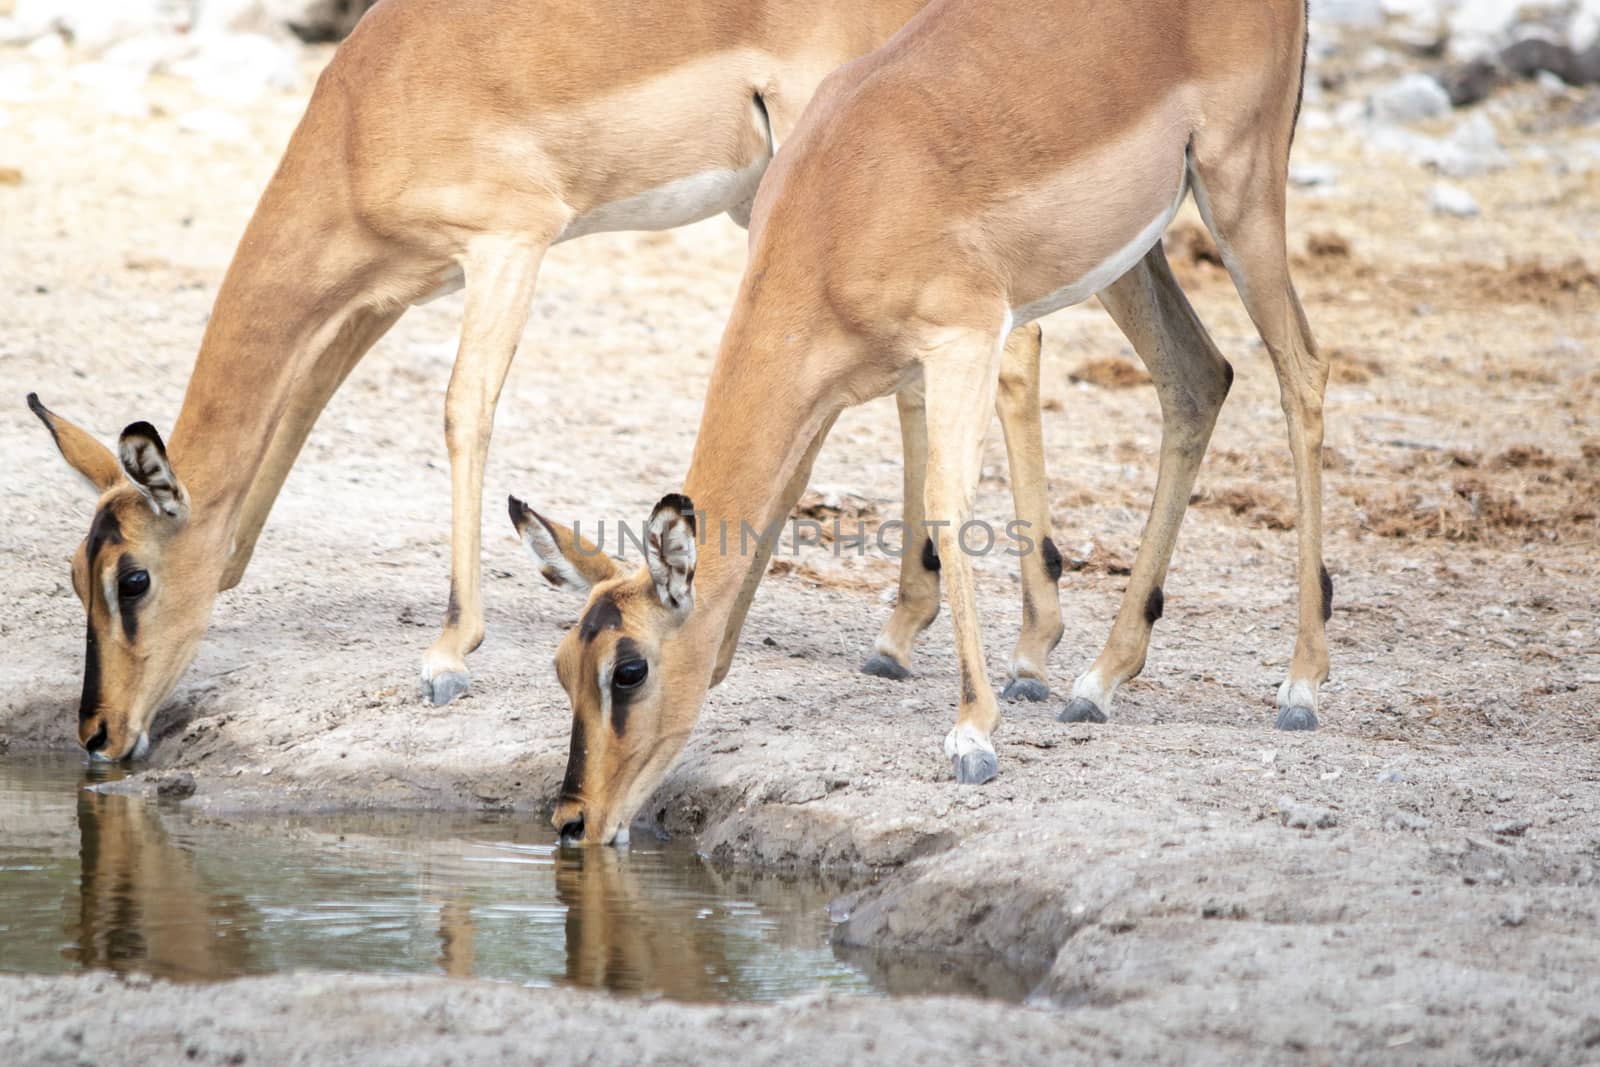 Two impala antelopes drinking water from a waterhole in the African savannah during a safari trip by kb79